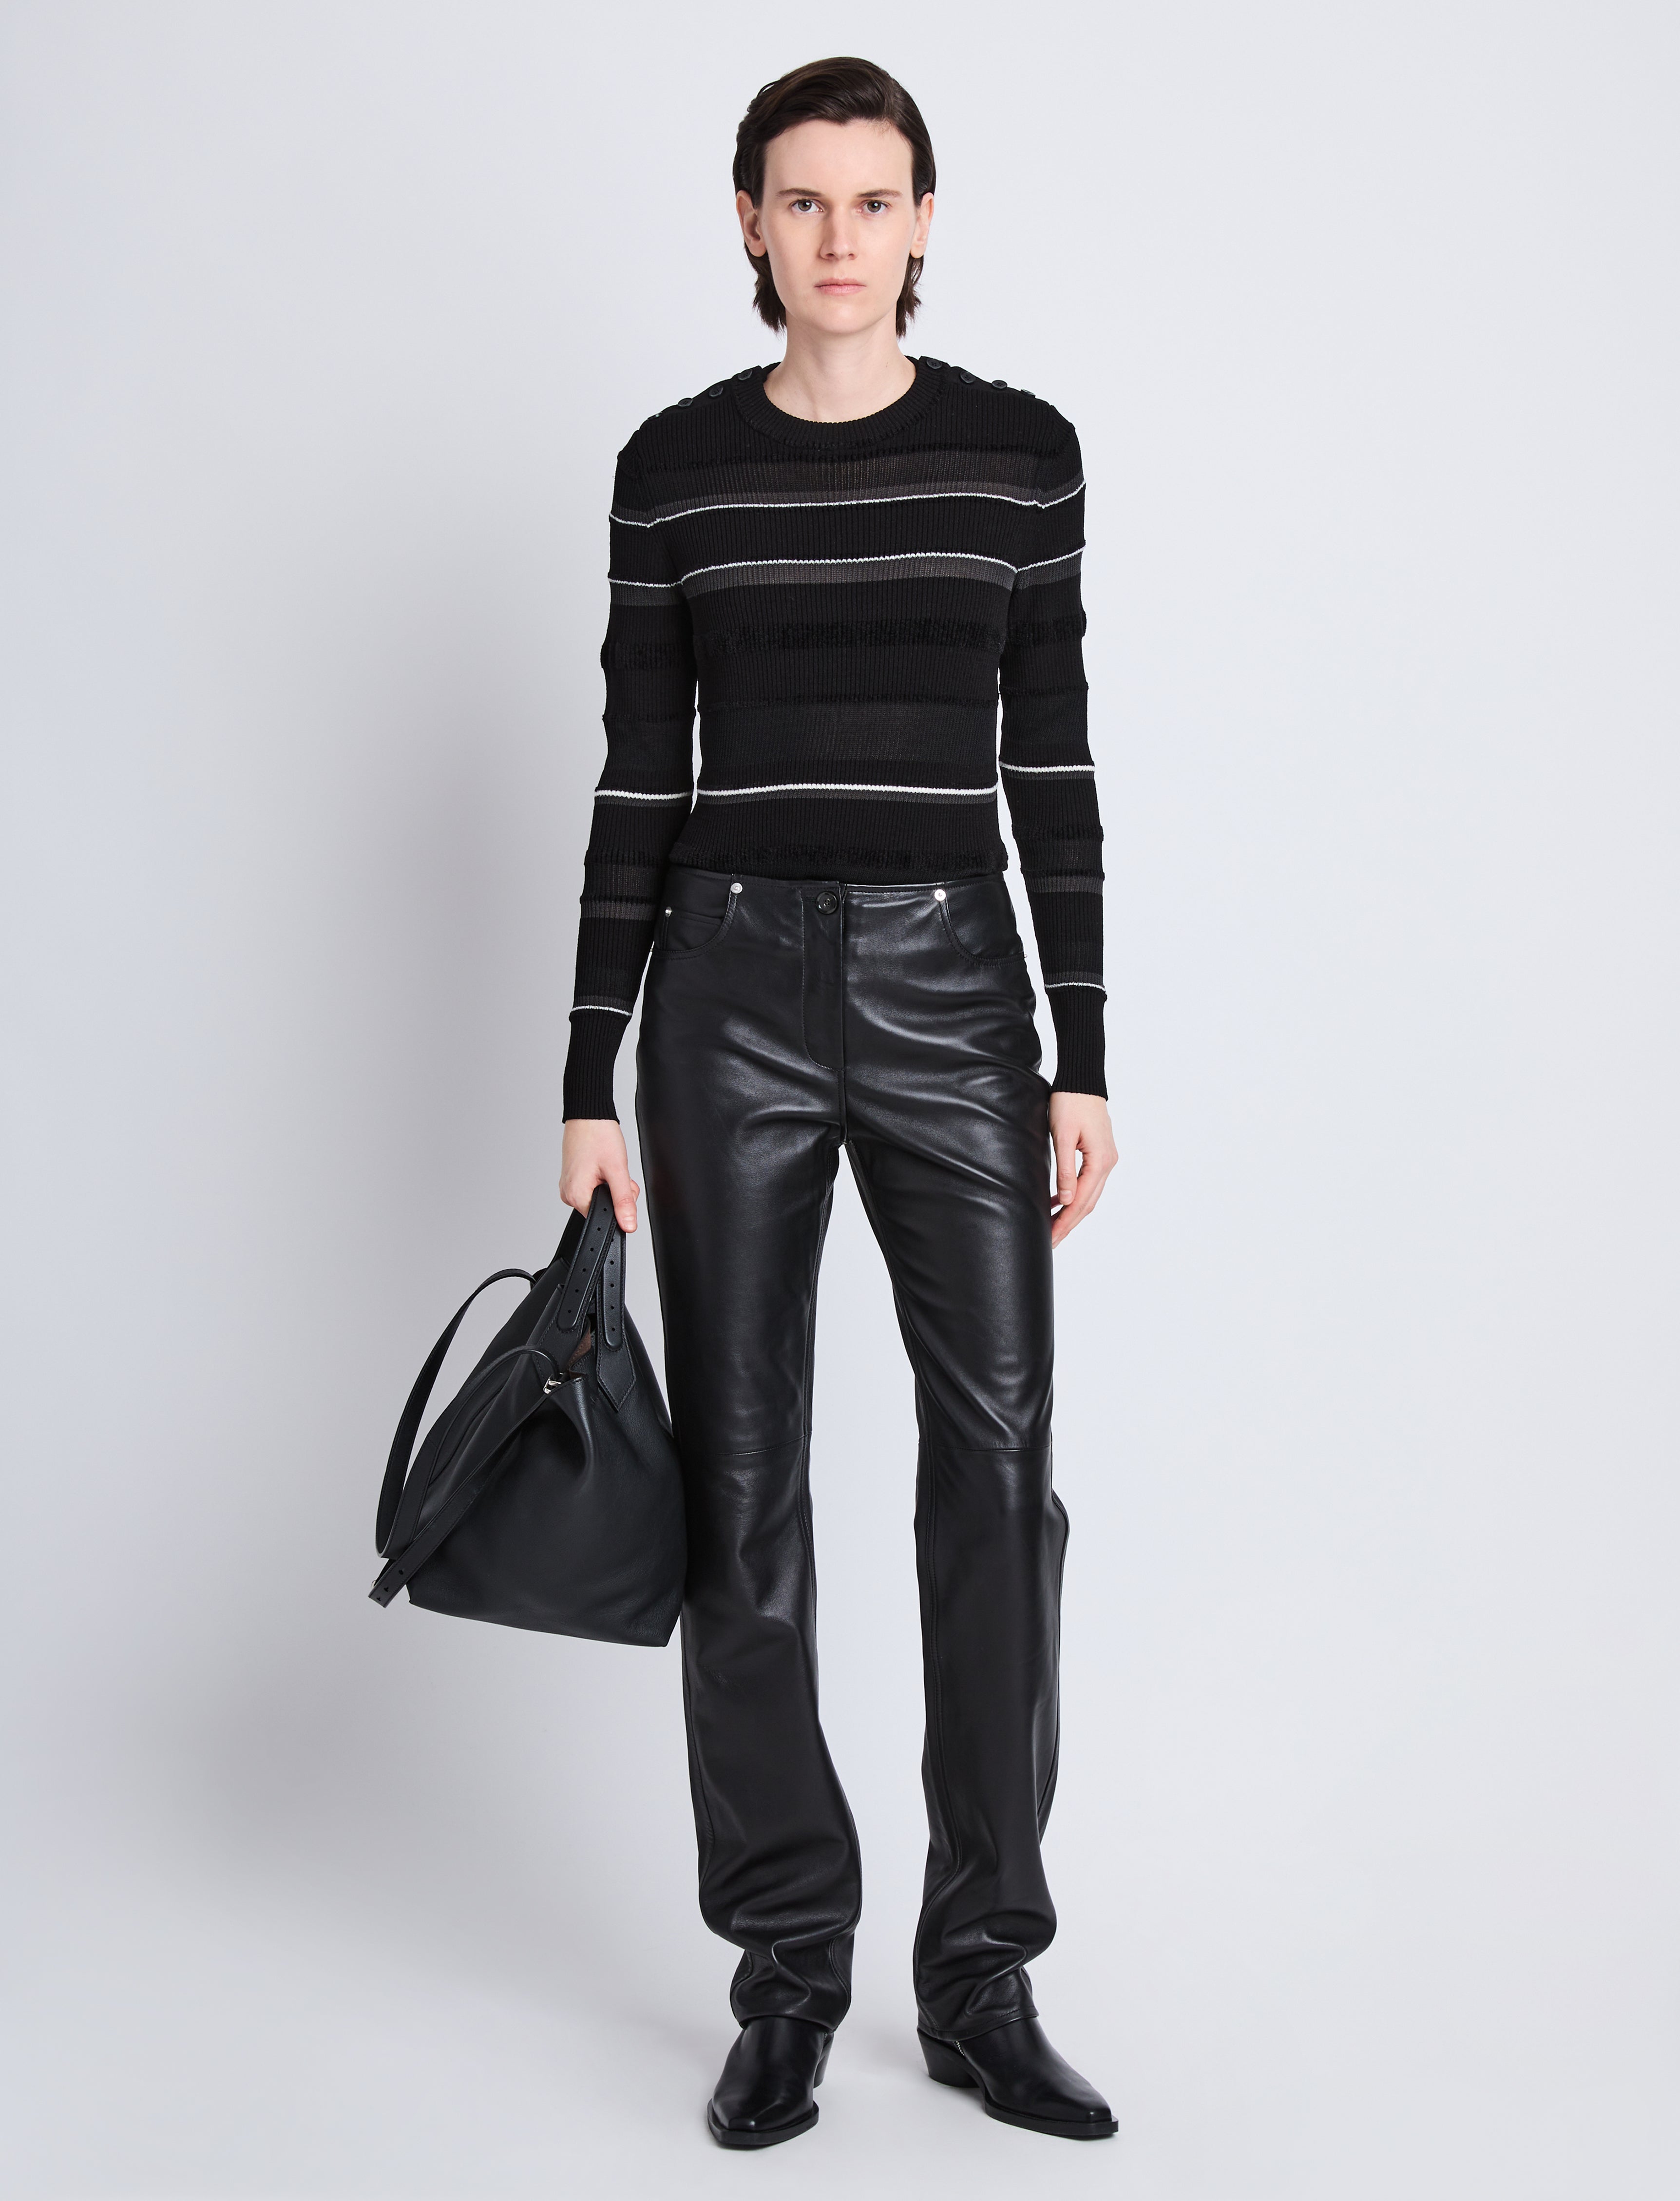 MCQ Black Cyber Lounge Pants - Black Leather trousers STAND STUDIO -  GenesinlifeShops Luxembourg